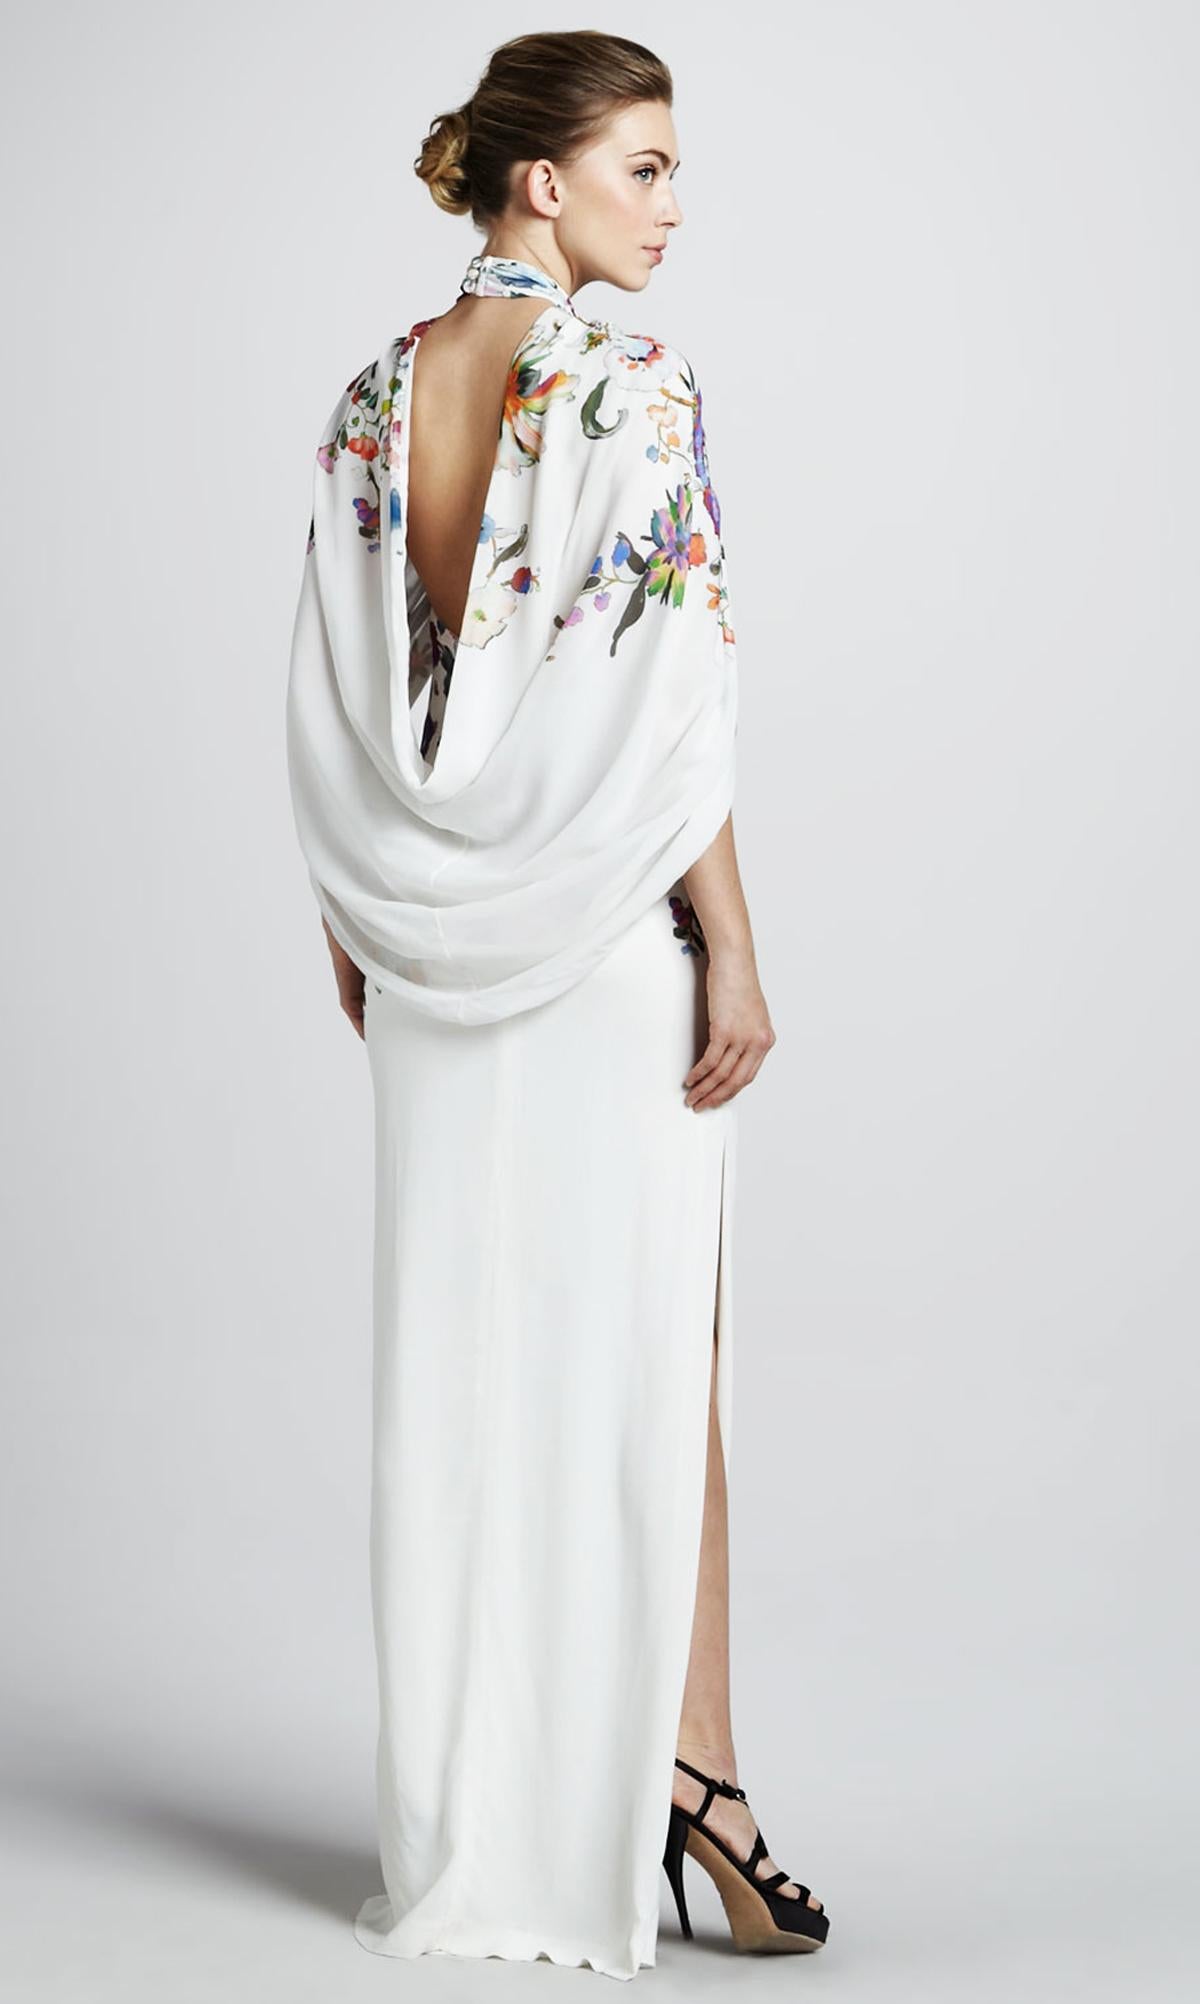 Etro Runway White Floral Print Caped Wedding Long Dress Gown It.44 1